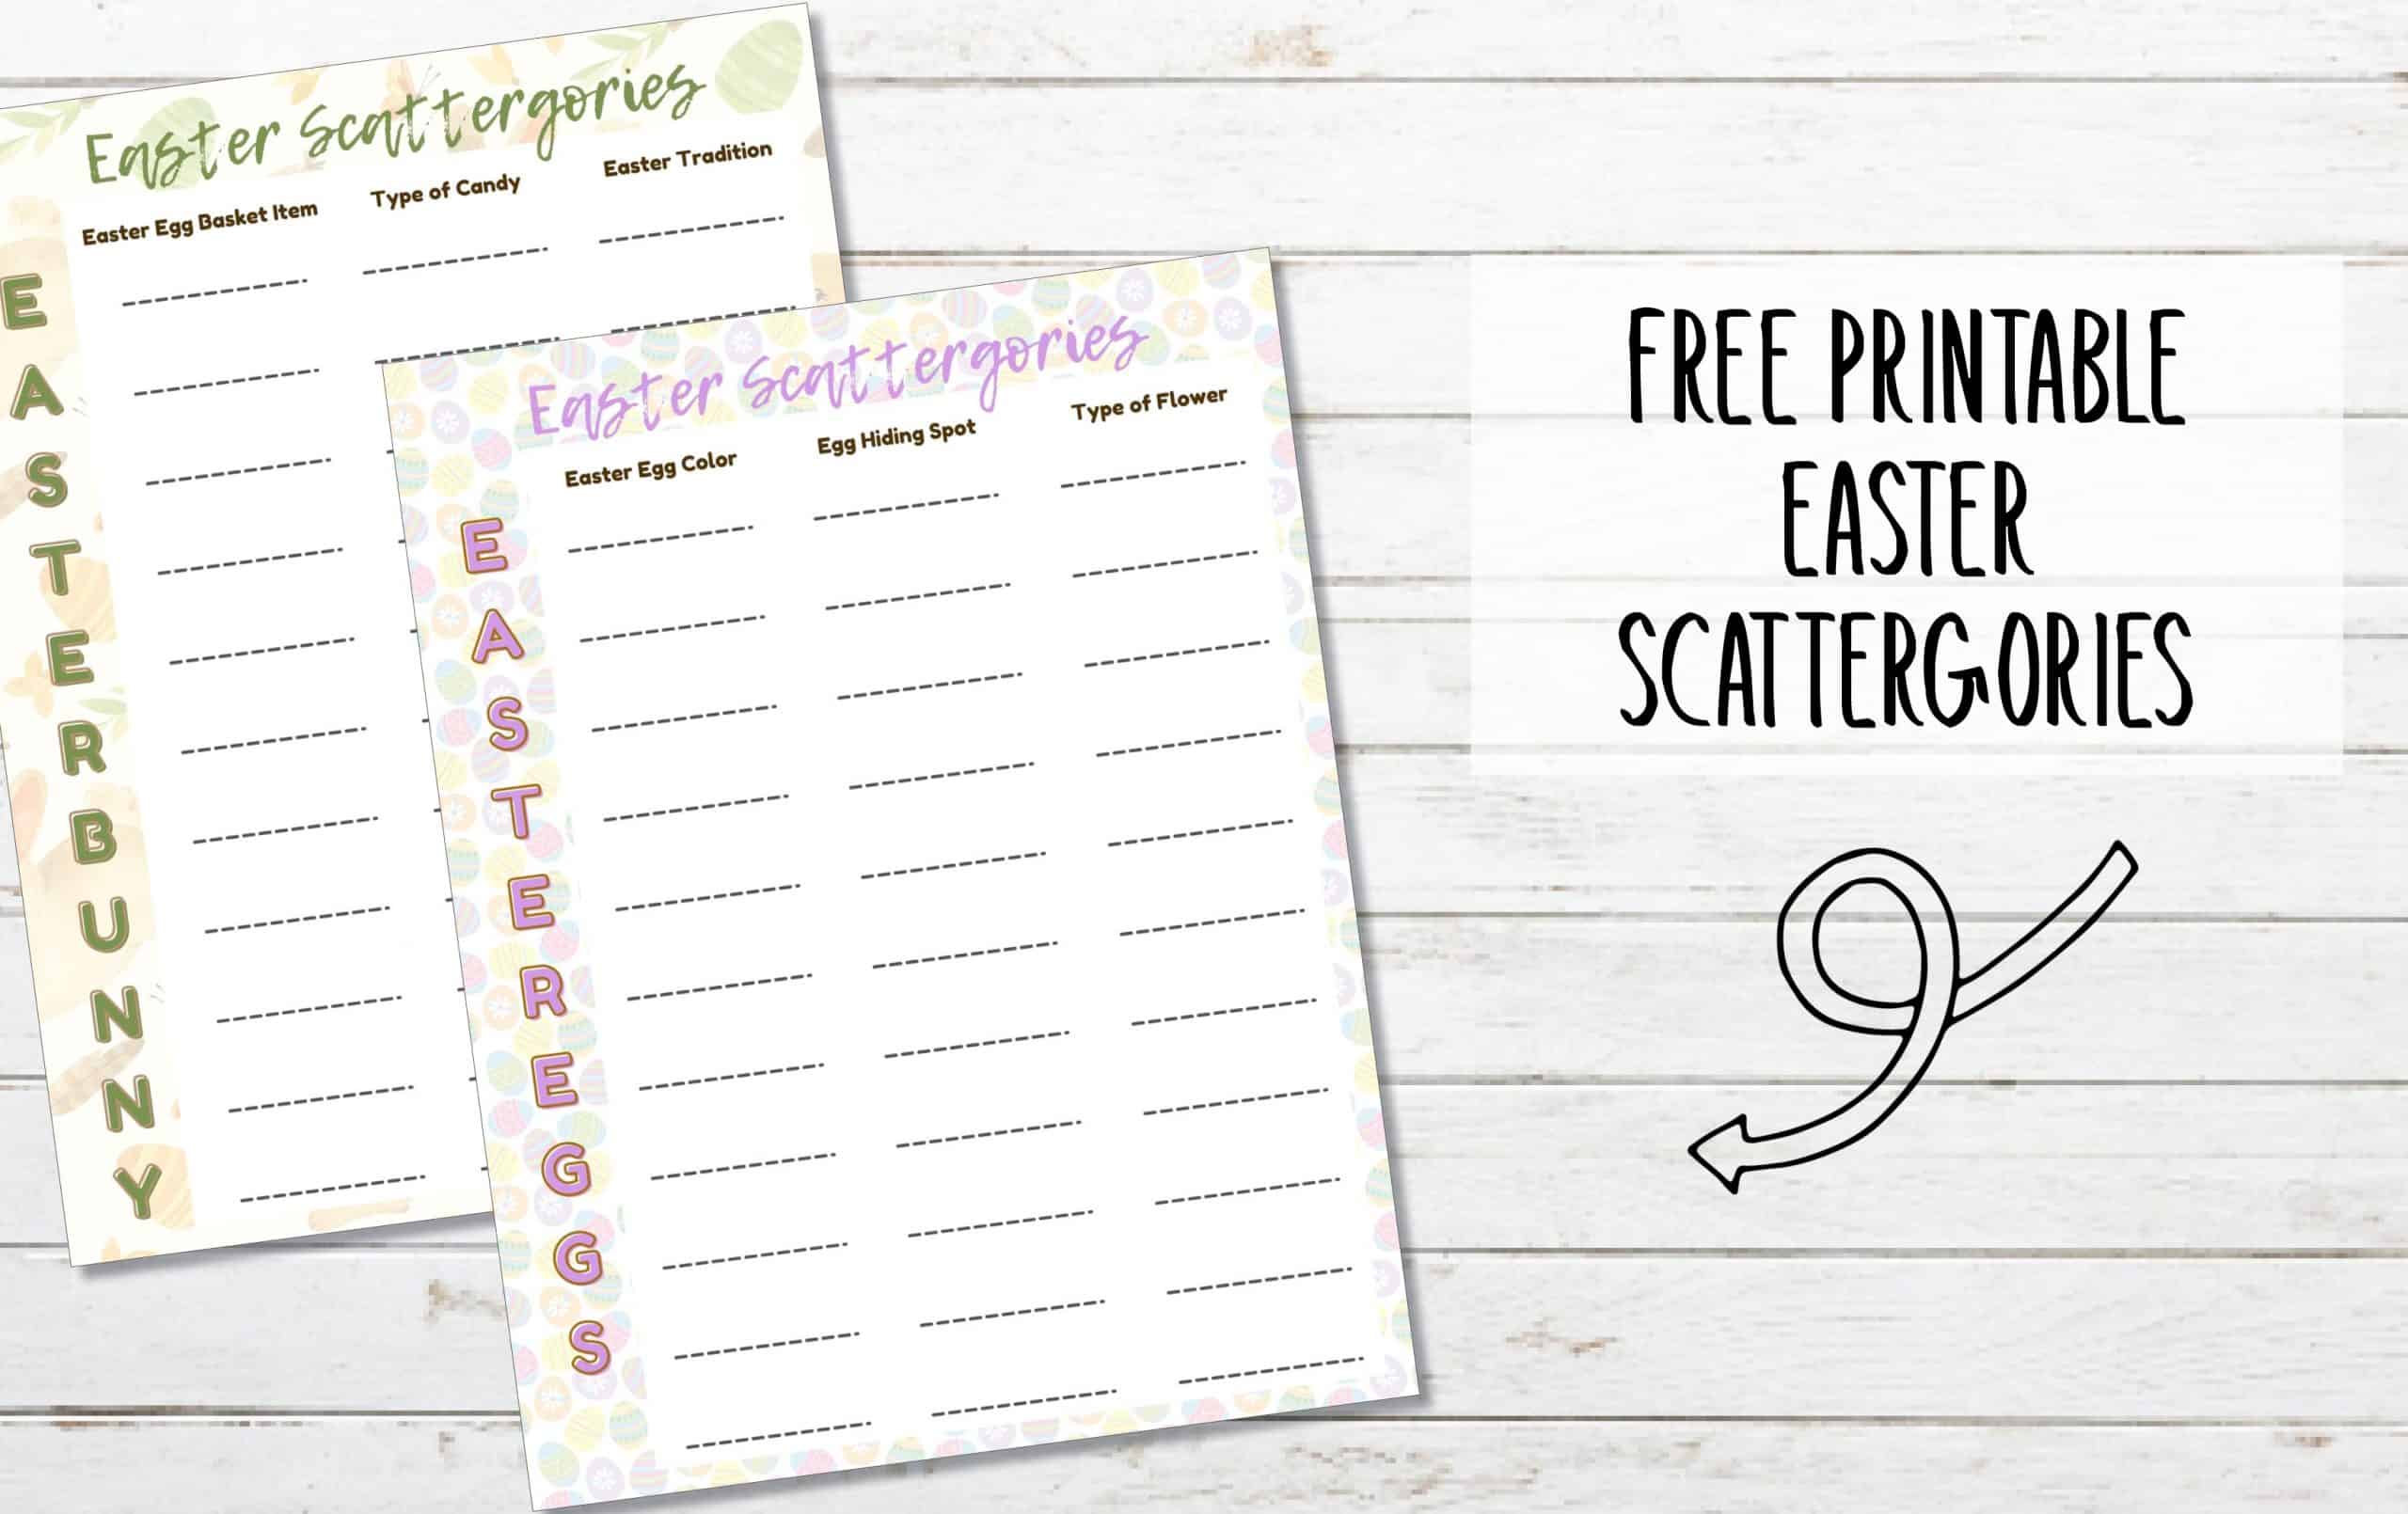 FREE Printable Easter Scattergories Game